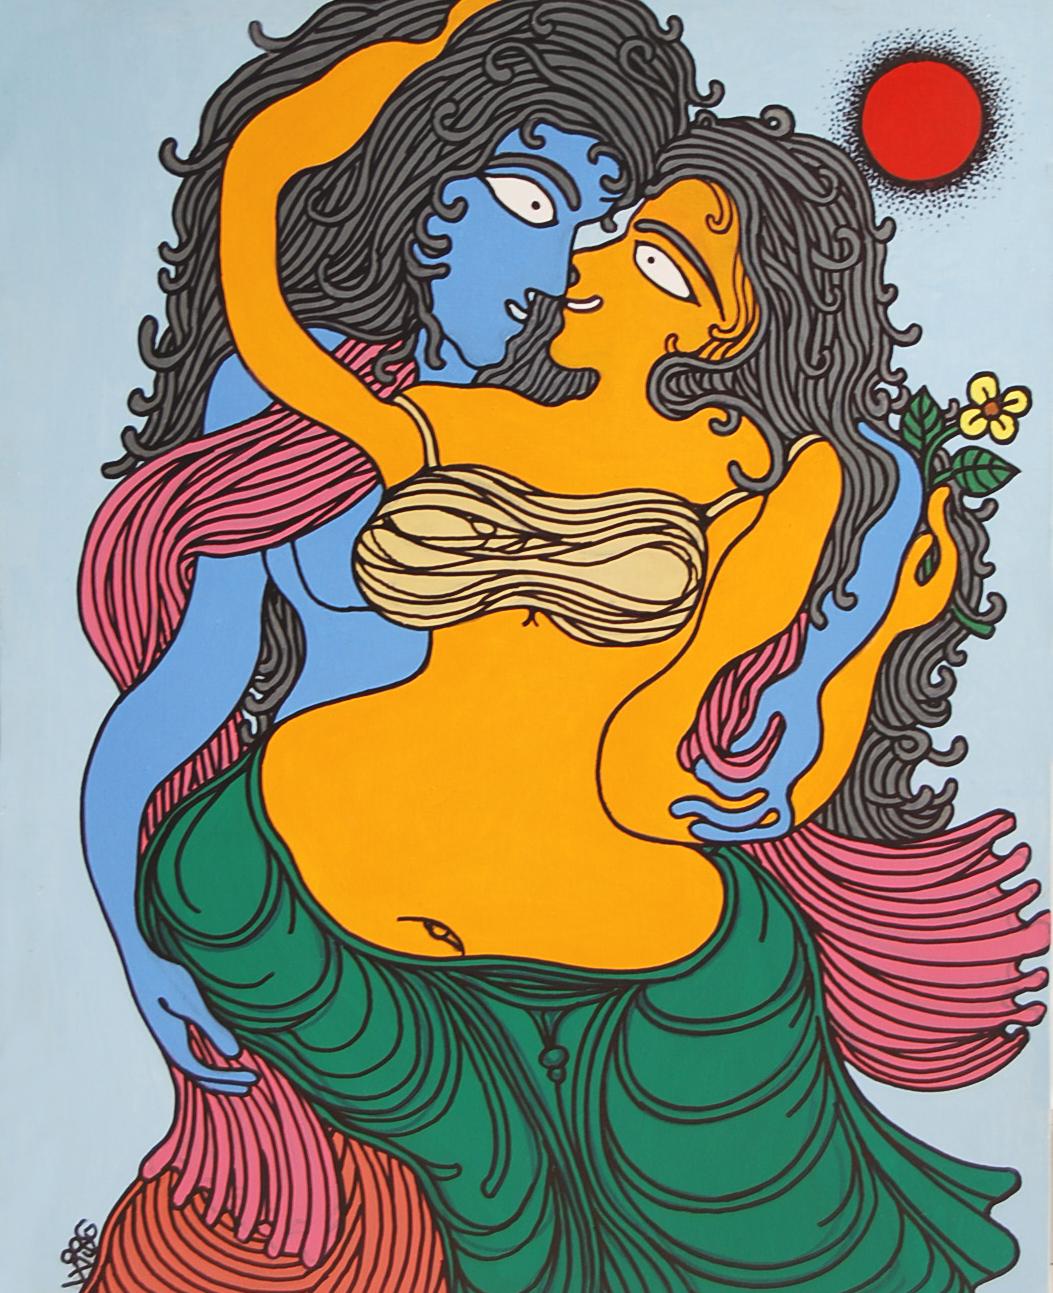 Radha-Kishen, Mythology, Acrylic, Green, Blue, Red by Top Artist "In Stock"